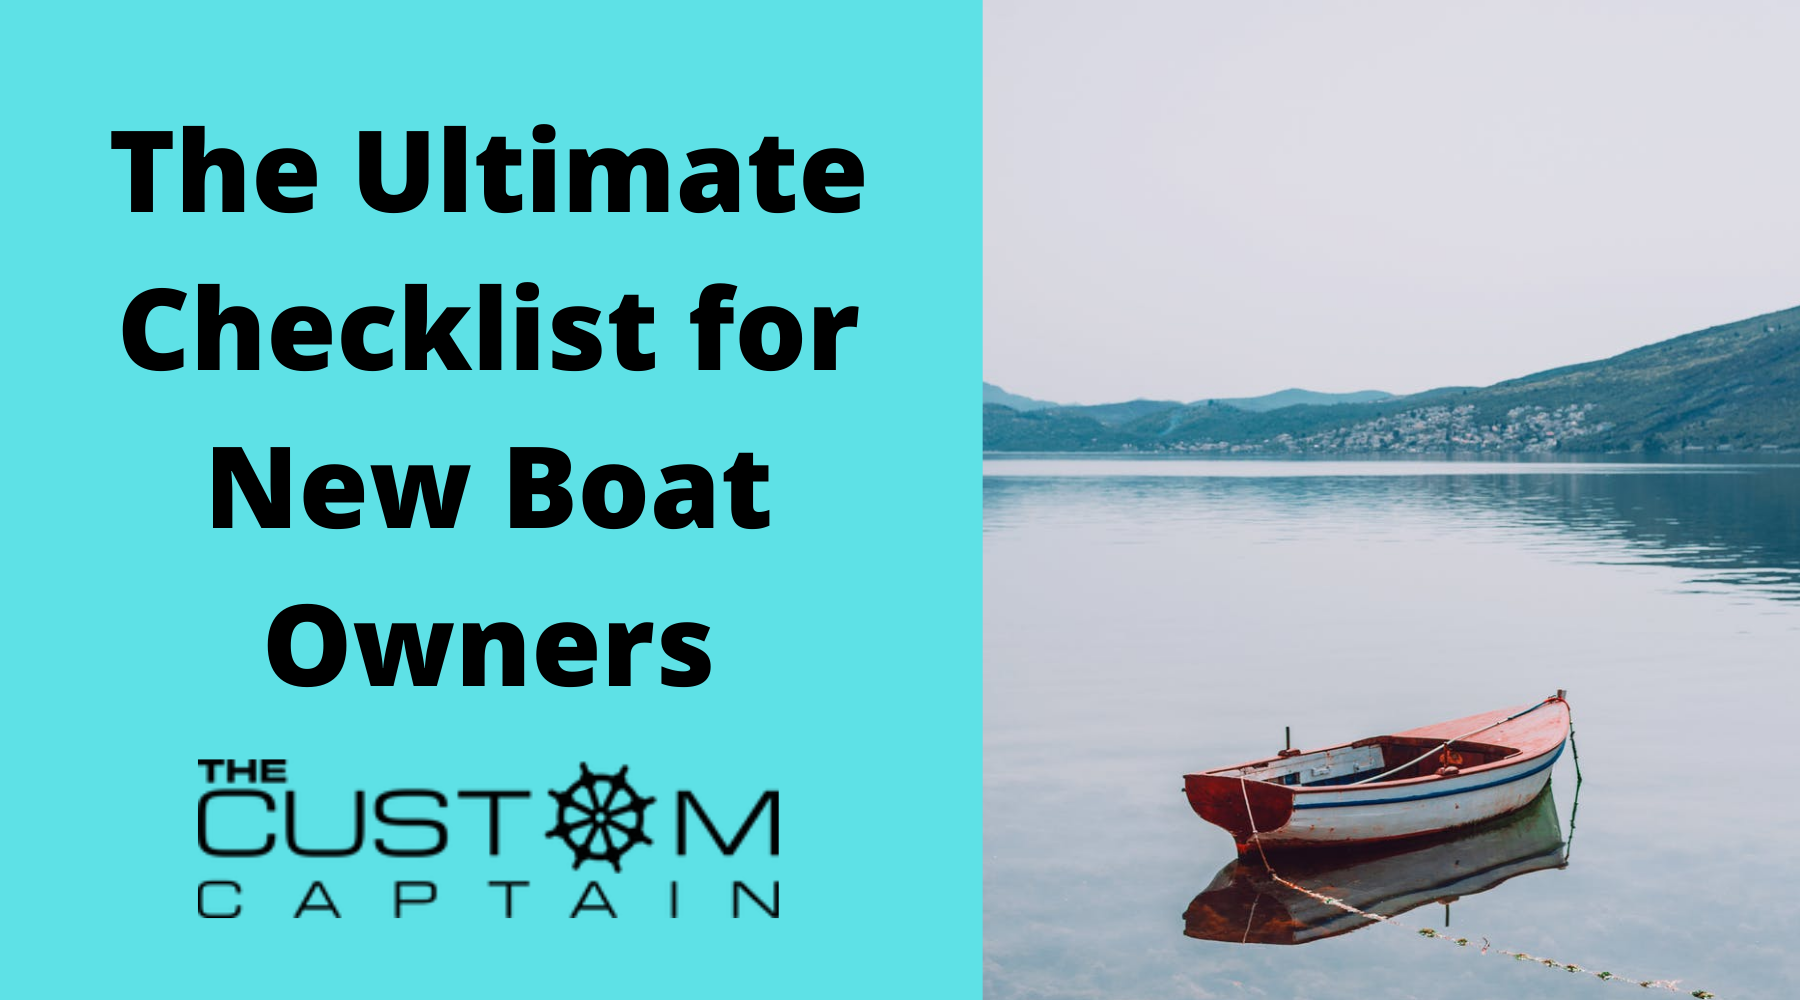 The Ultimate Checklist for New Boat Owners